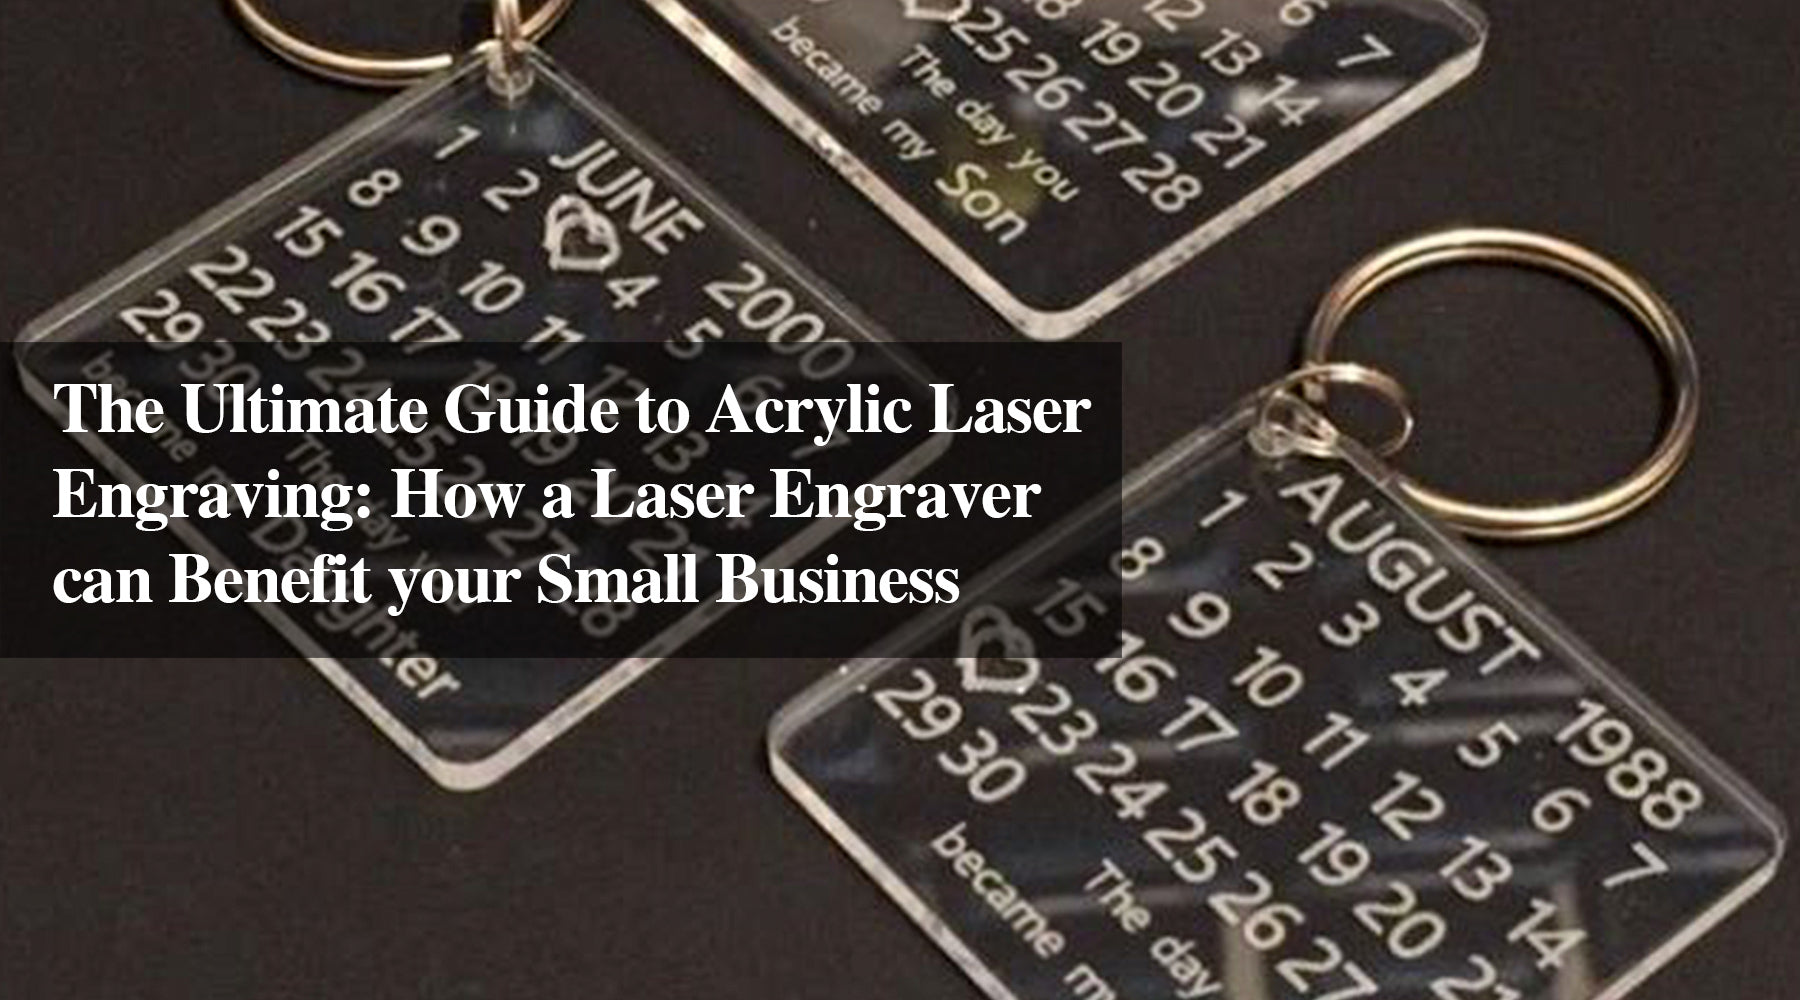 The Ultimate Guide to Acrylic Laser Engraving: How a Laser Engraver can Benefit your Small Business